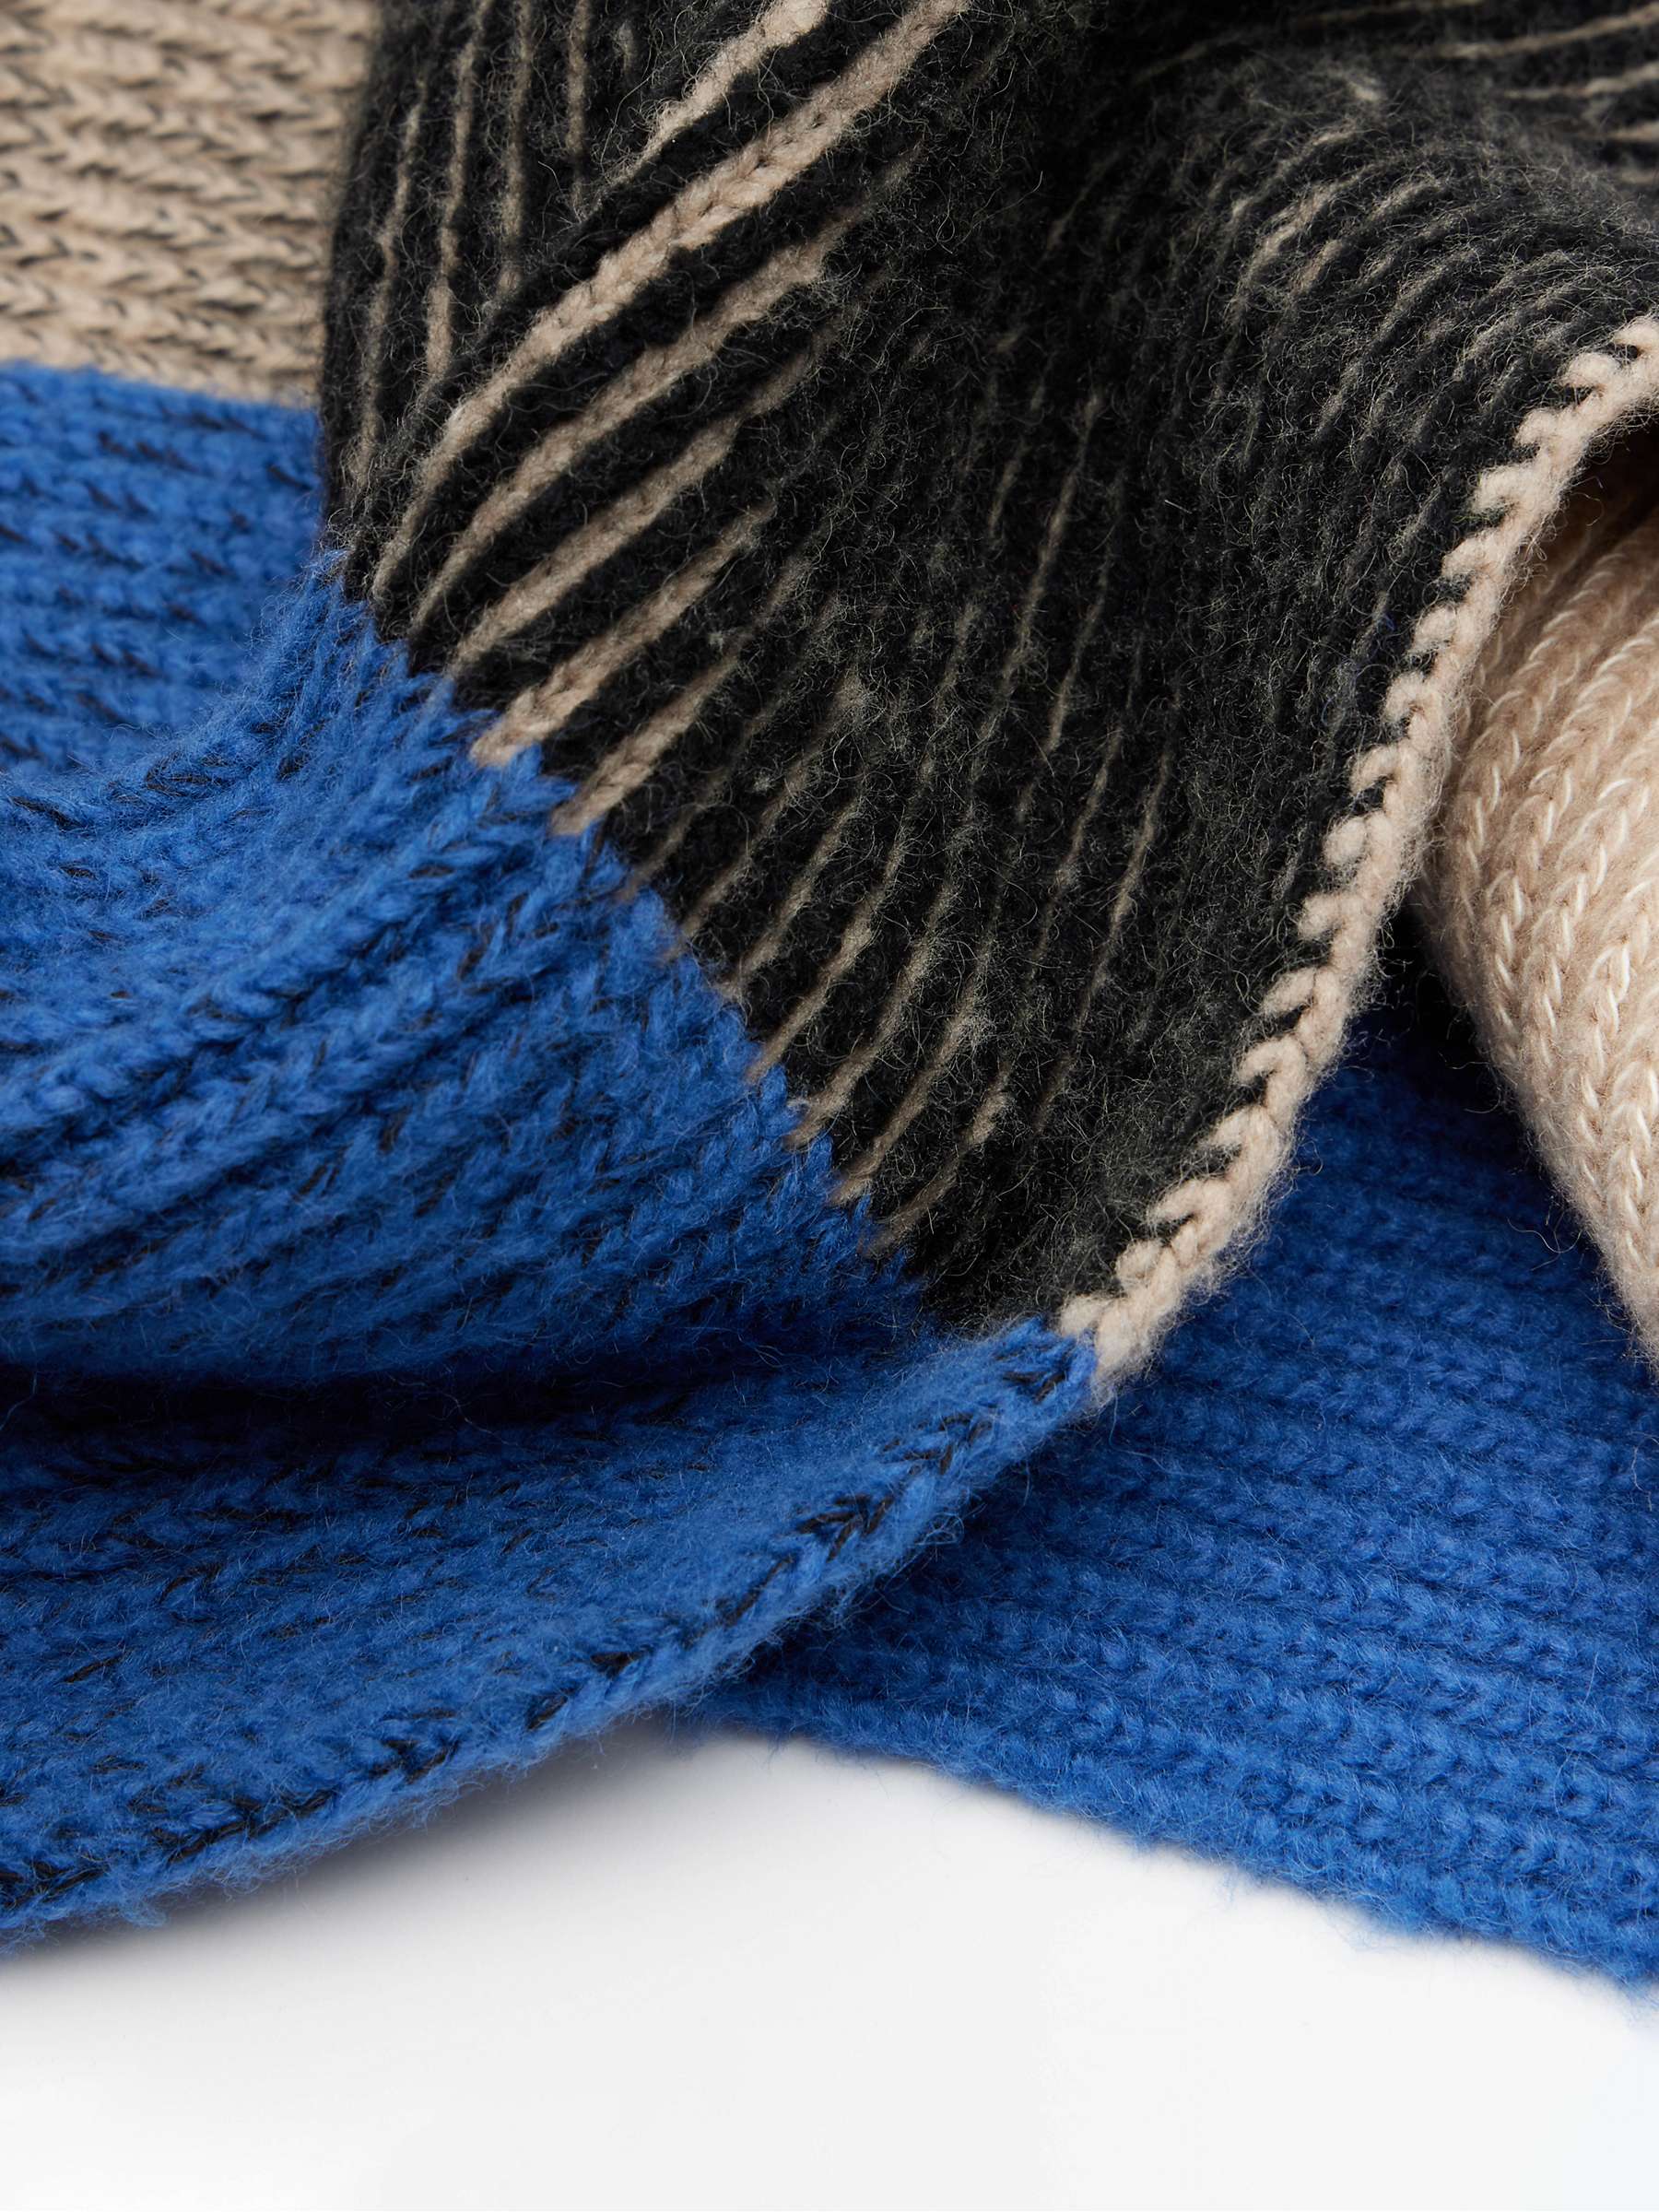 Buy HUSH Margo Knitted Colourblock Scarf, Multi Online at johnlewis.com